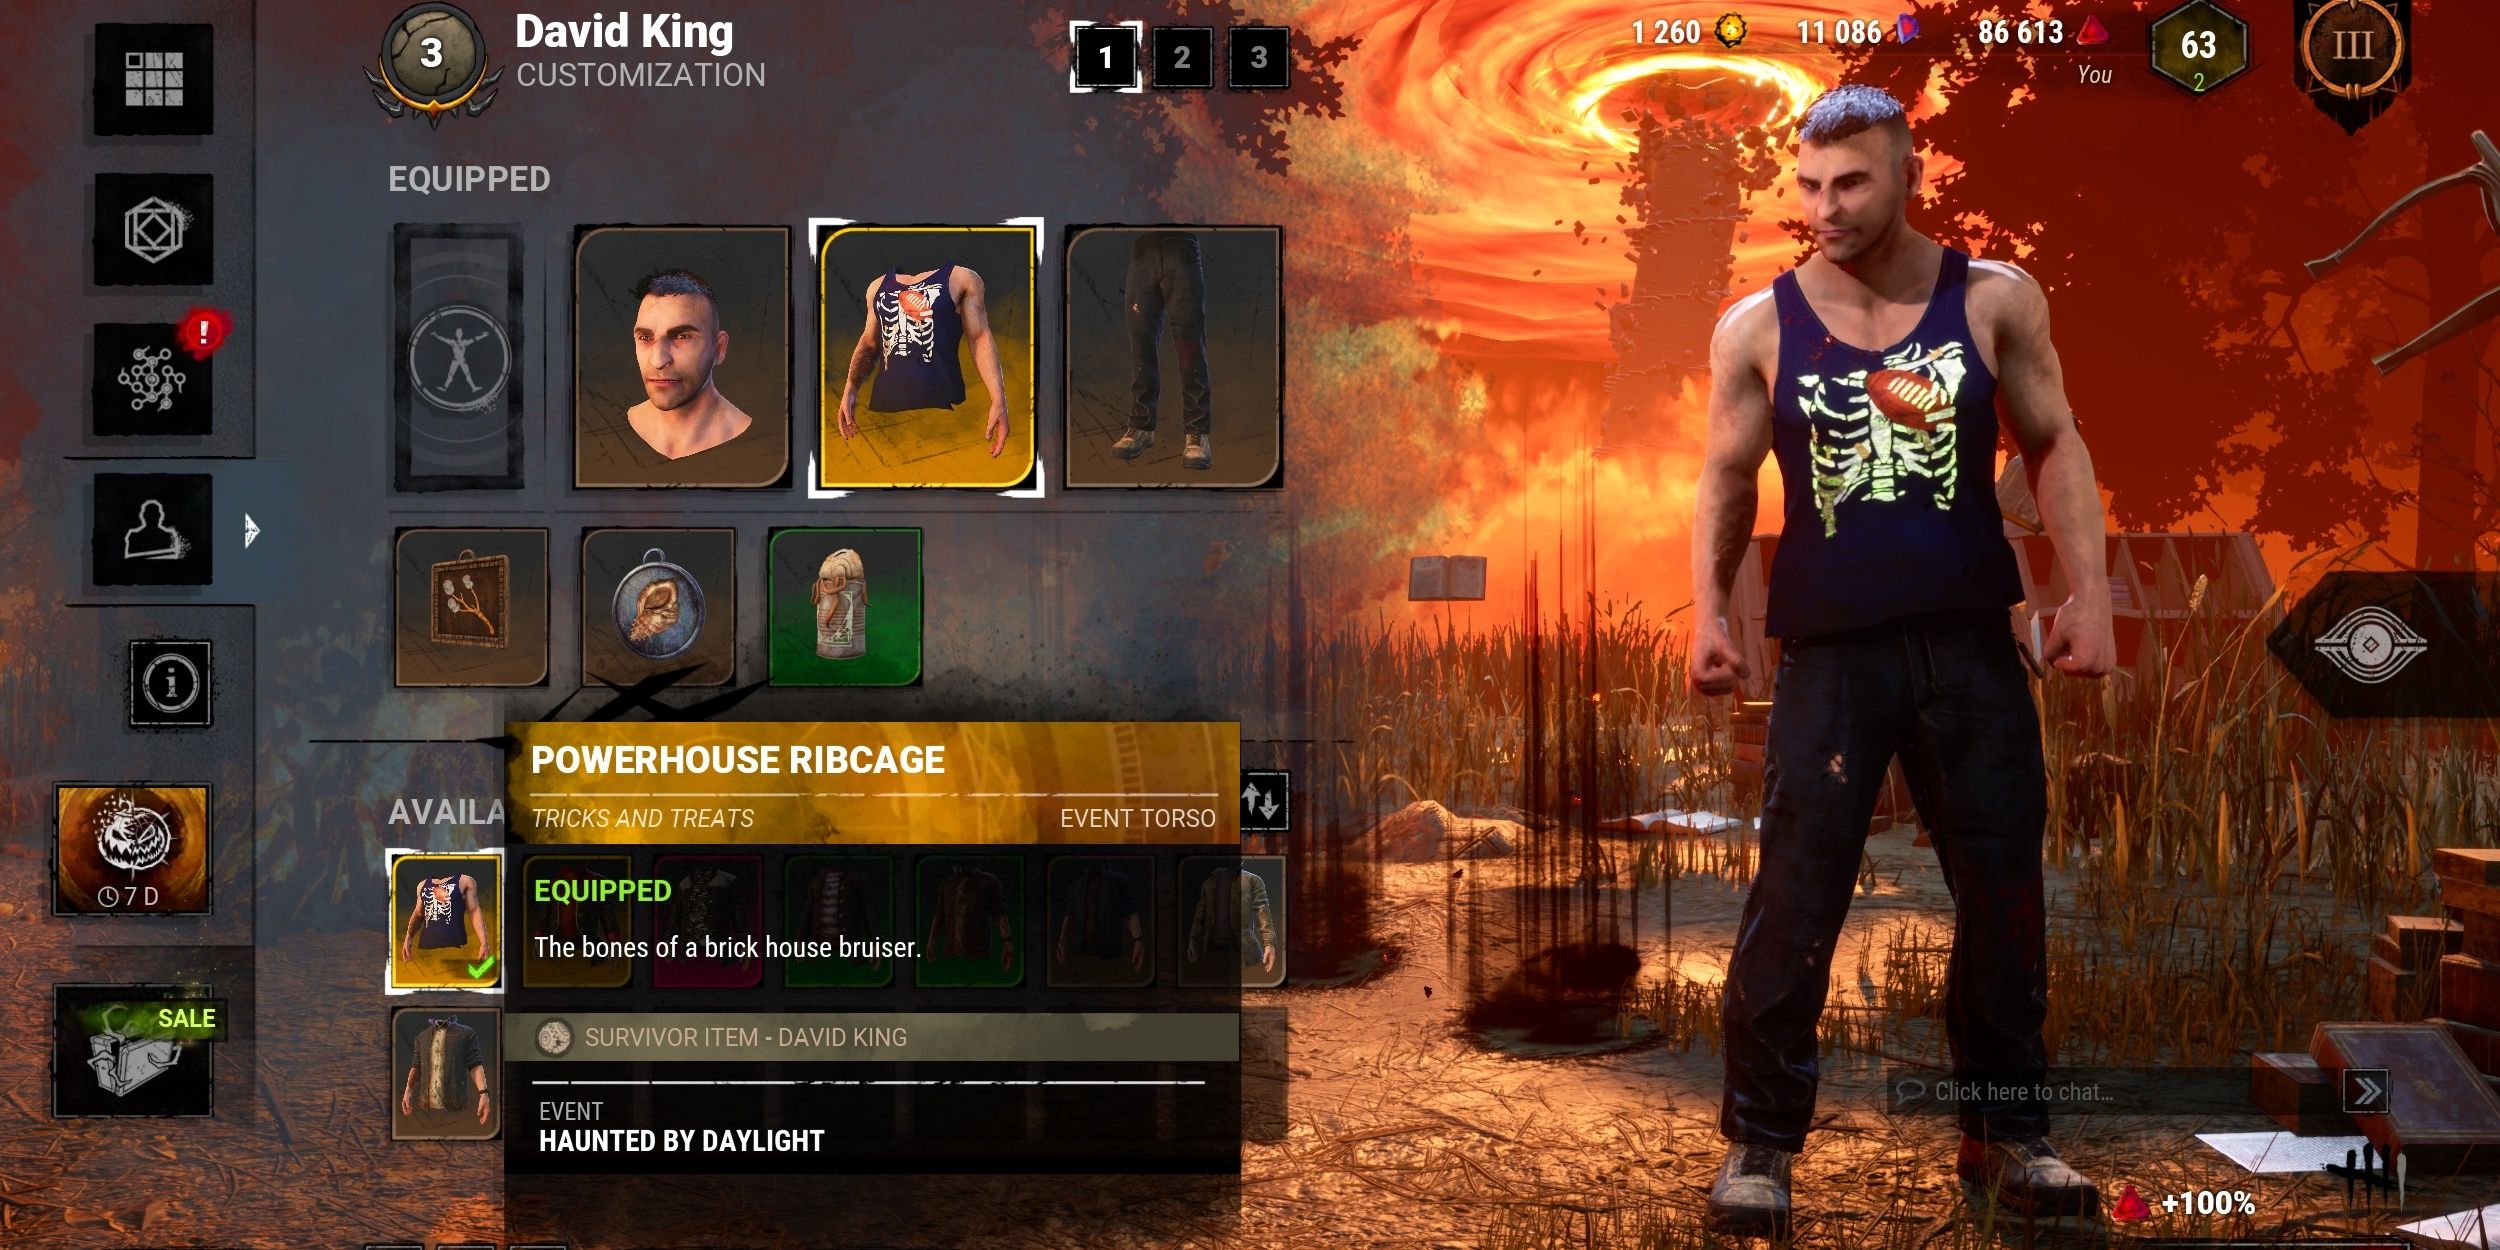 David King with the Powerhosue Ribcage chest cosmetic